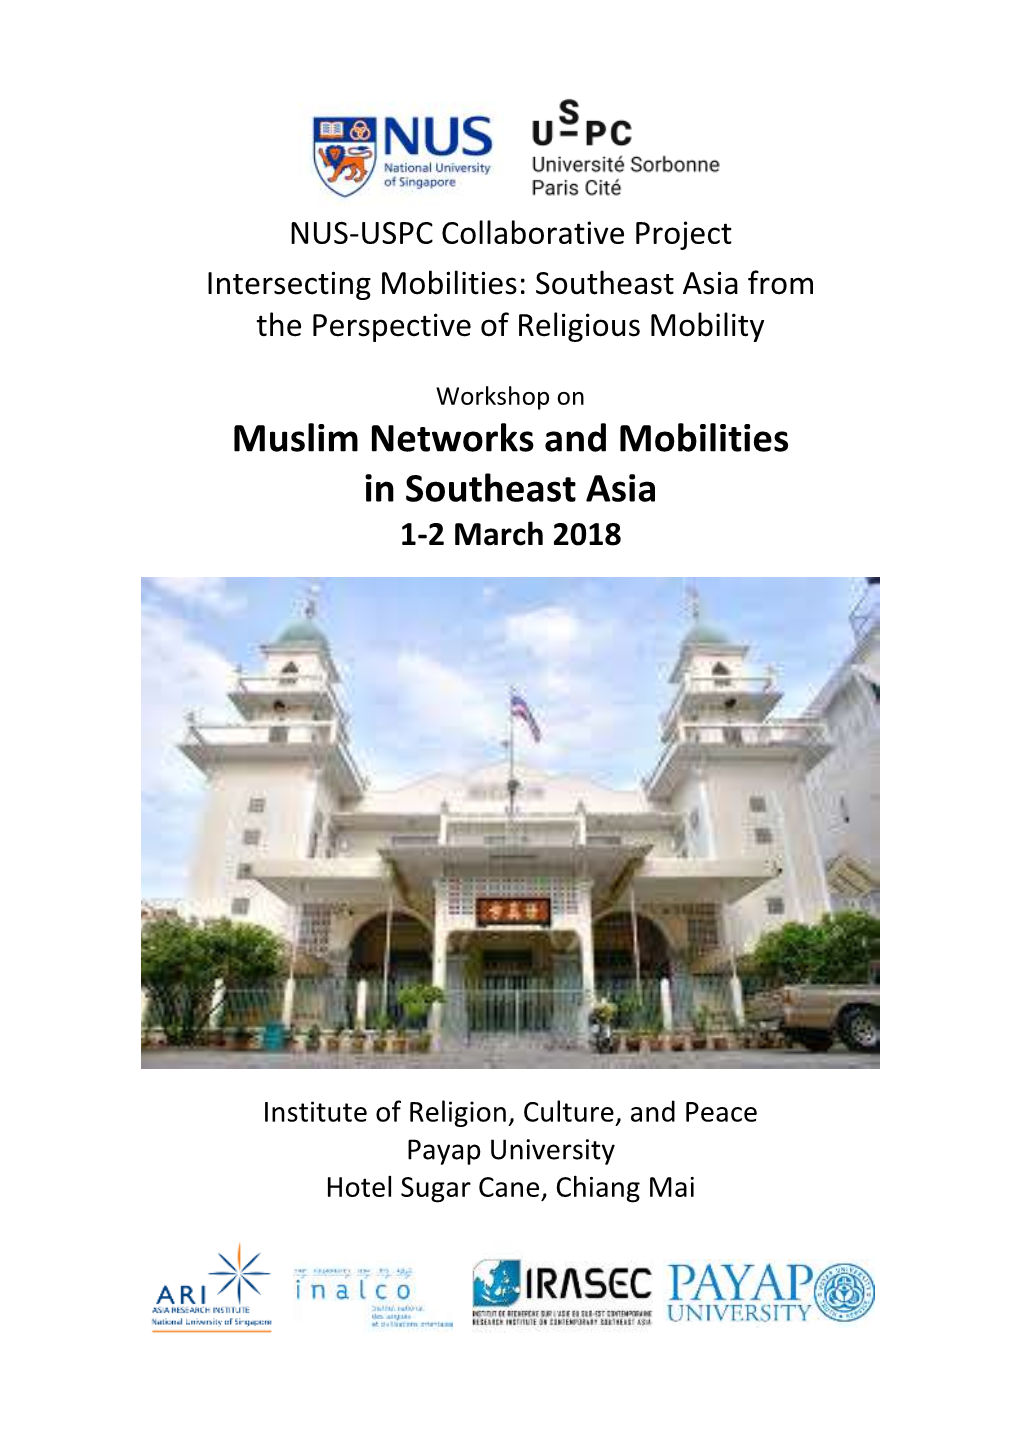 Muslim Networks and Mobilities in Southeast Asia 1-2 March 2018